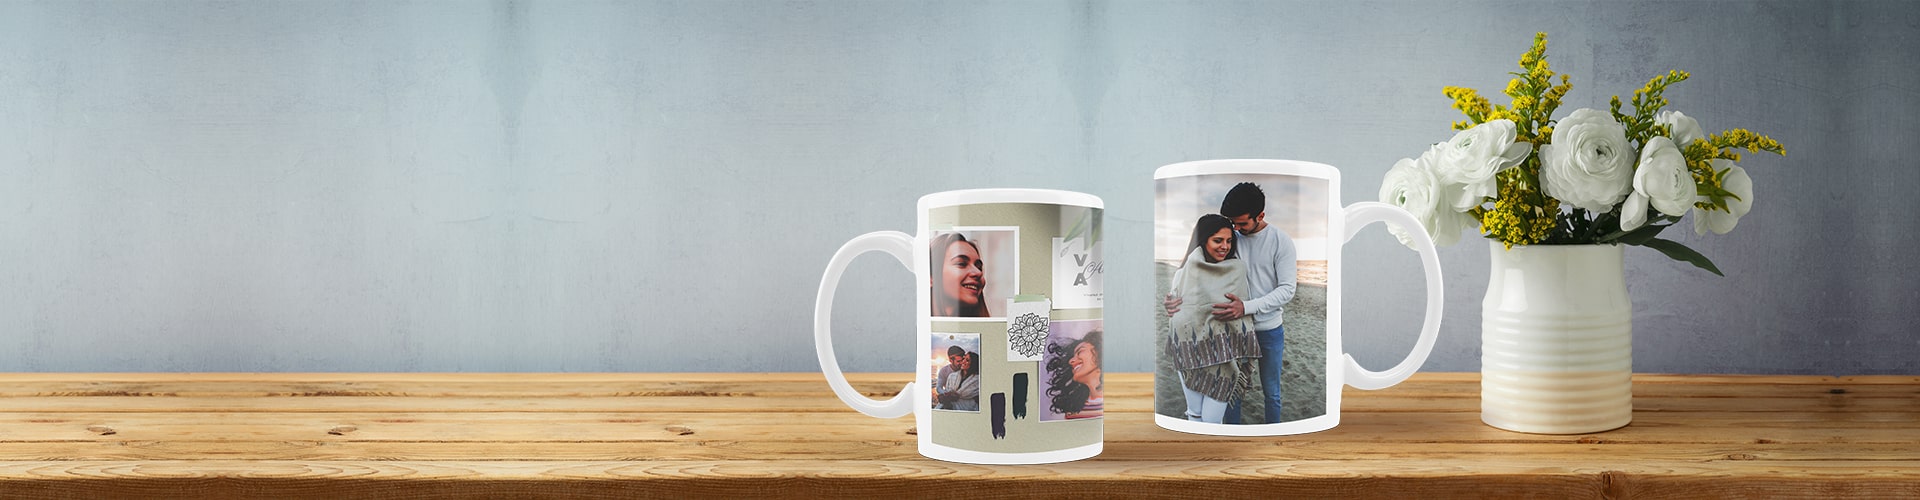 Custom Photo Mugs to Gift to Your Friends and Family